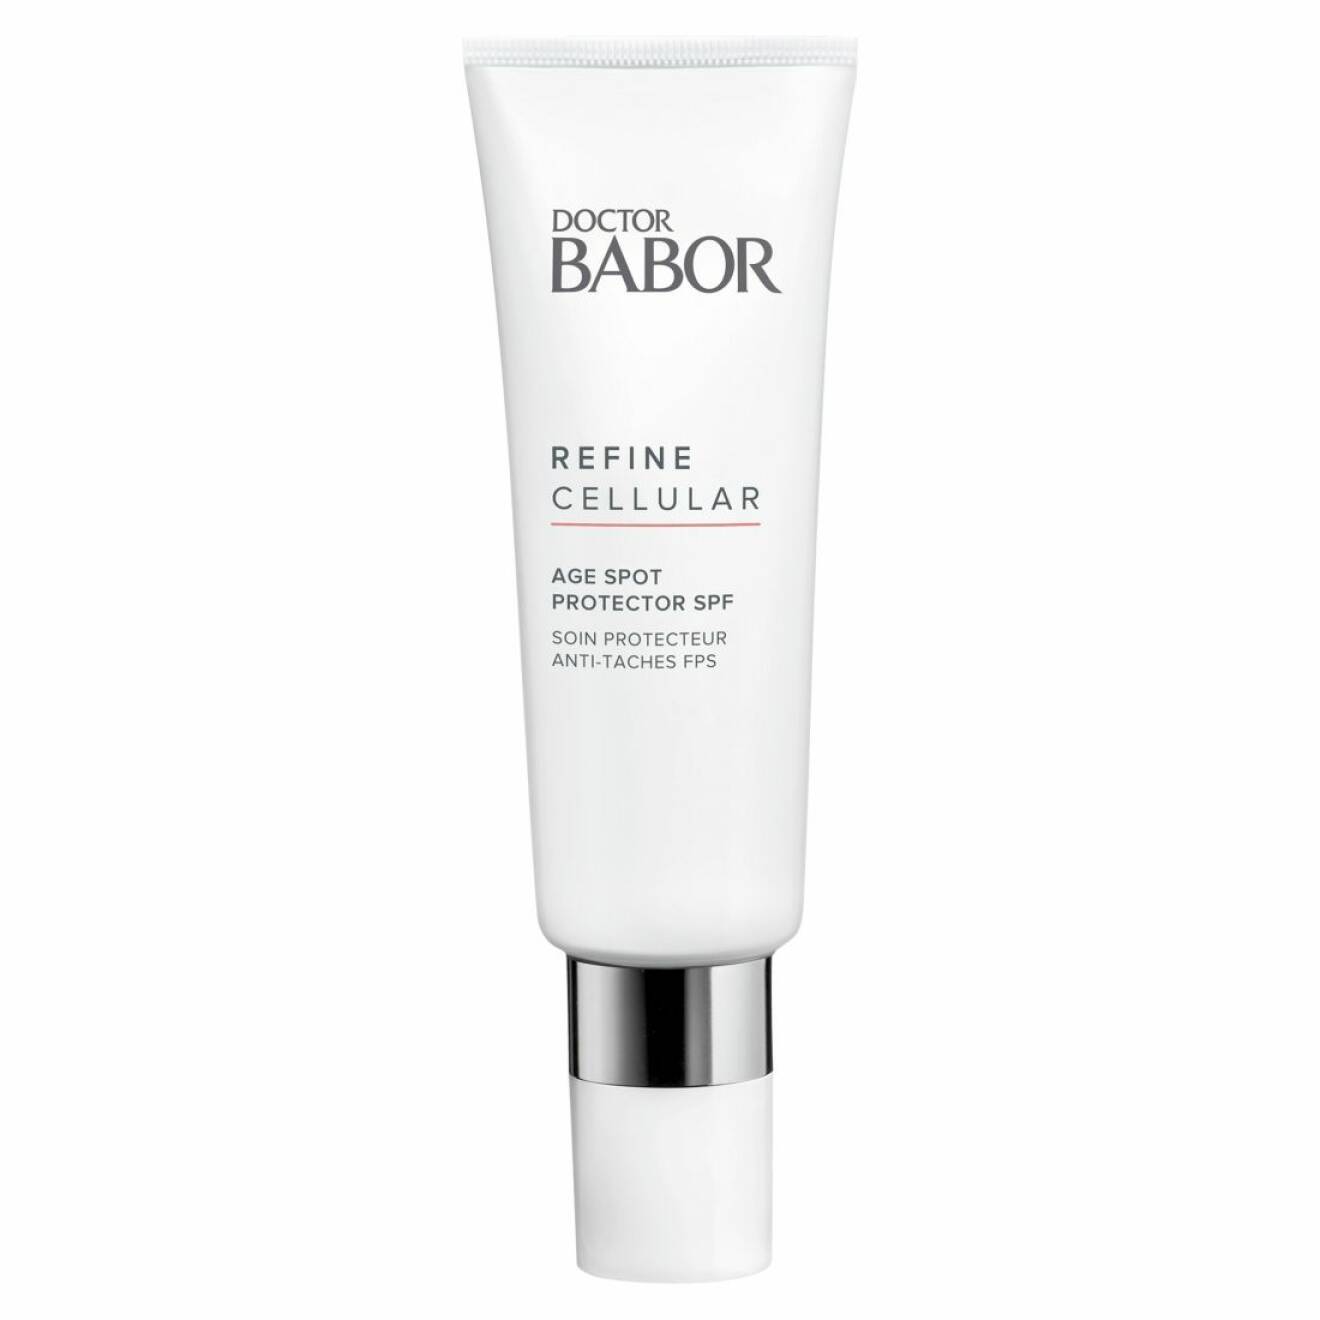 Doctor Babors Age spot Protector Spf 30